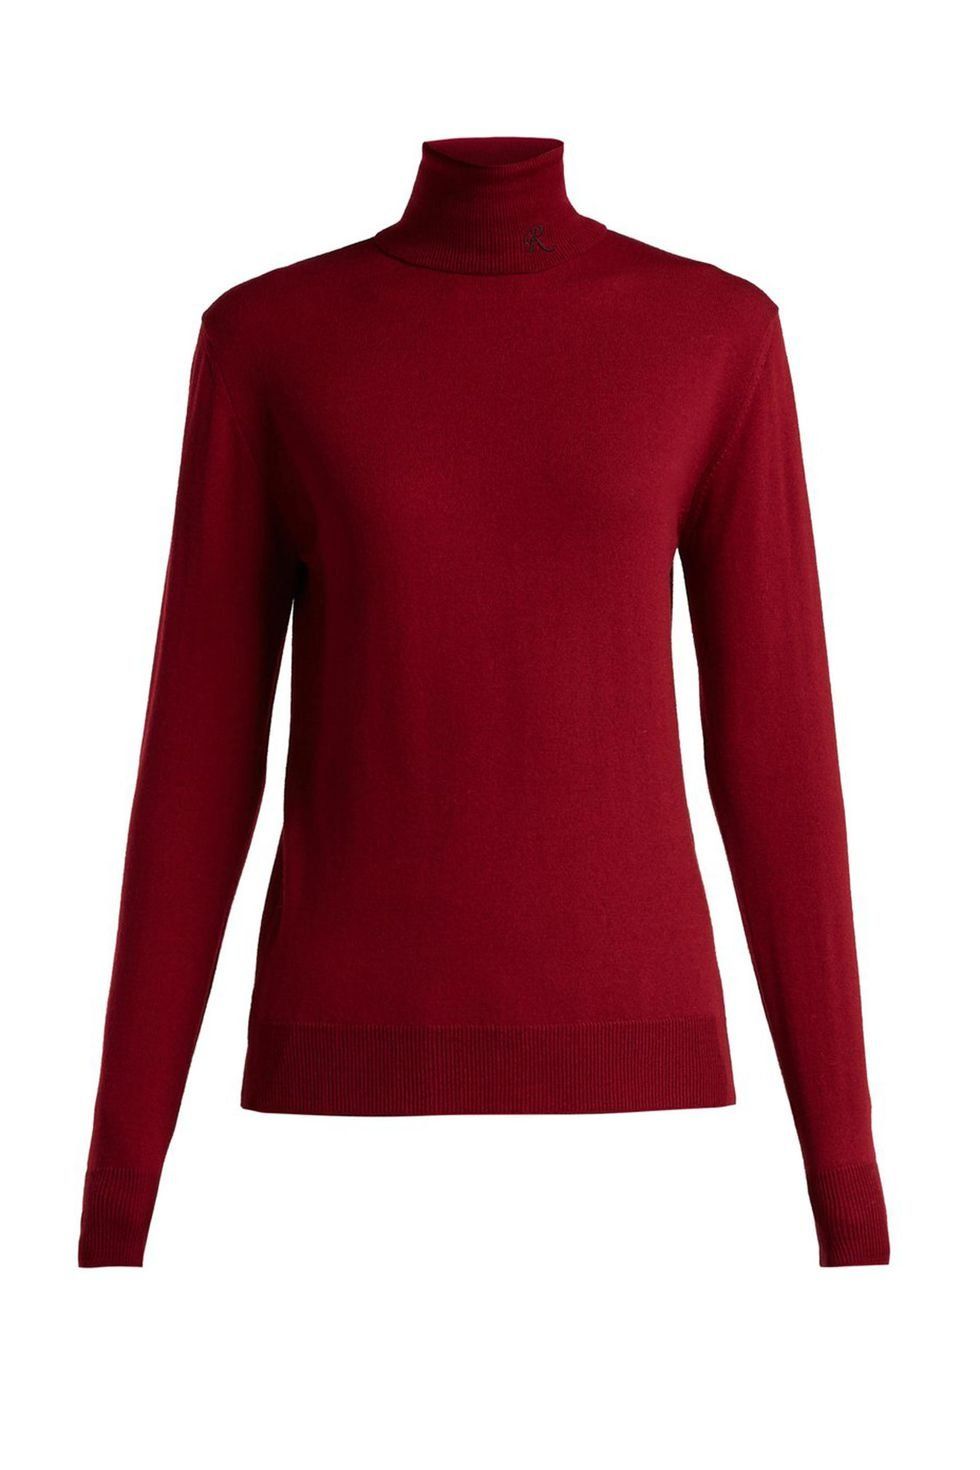 Clothing, Sleeve, Red, Neck, Long-sleeved t-shirt, Outerwear, Maroon, Shoulder, Sweater, Collar, 